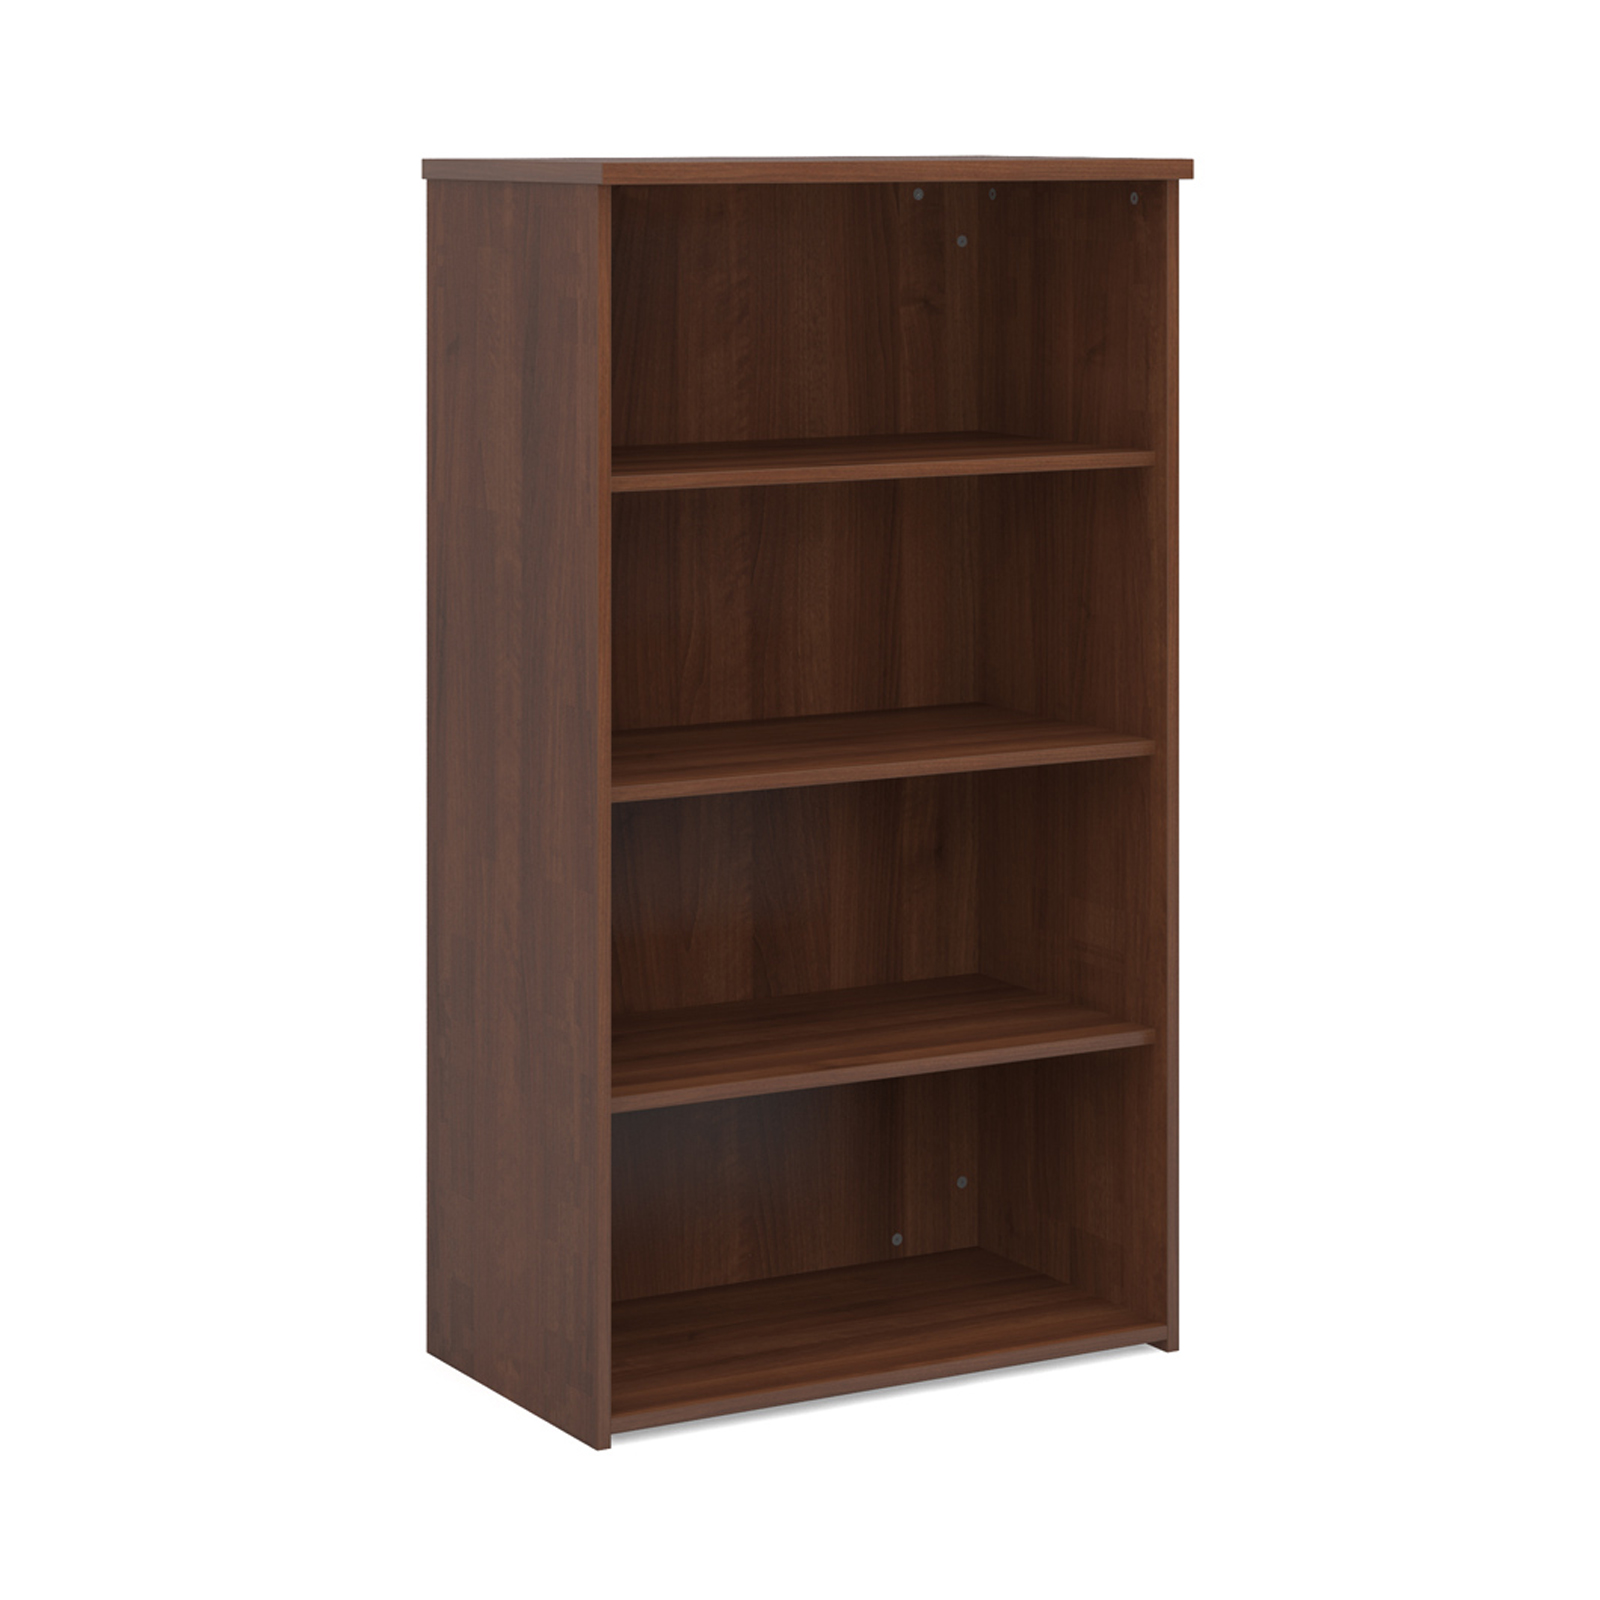 Over 1200mm High Universal bookcase 1440mm high with 3 shelves - walnut